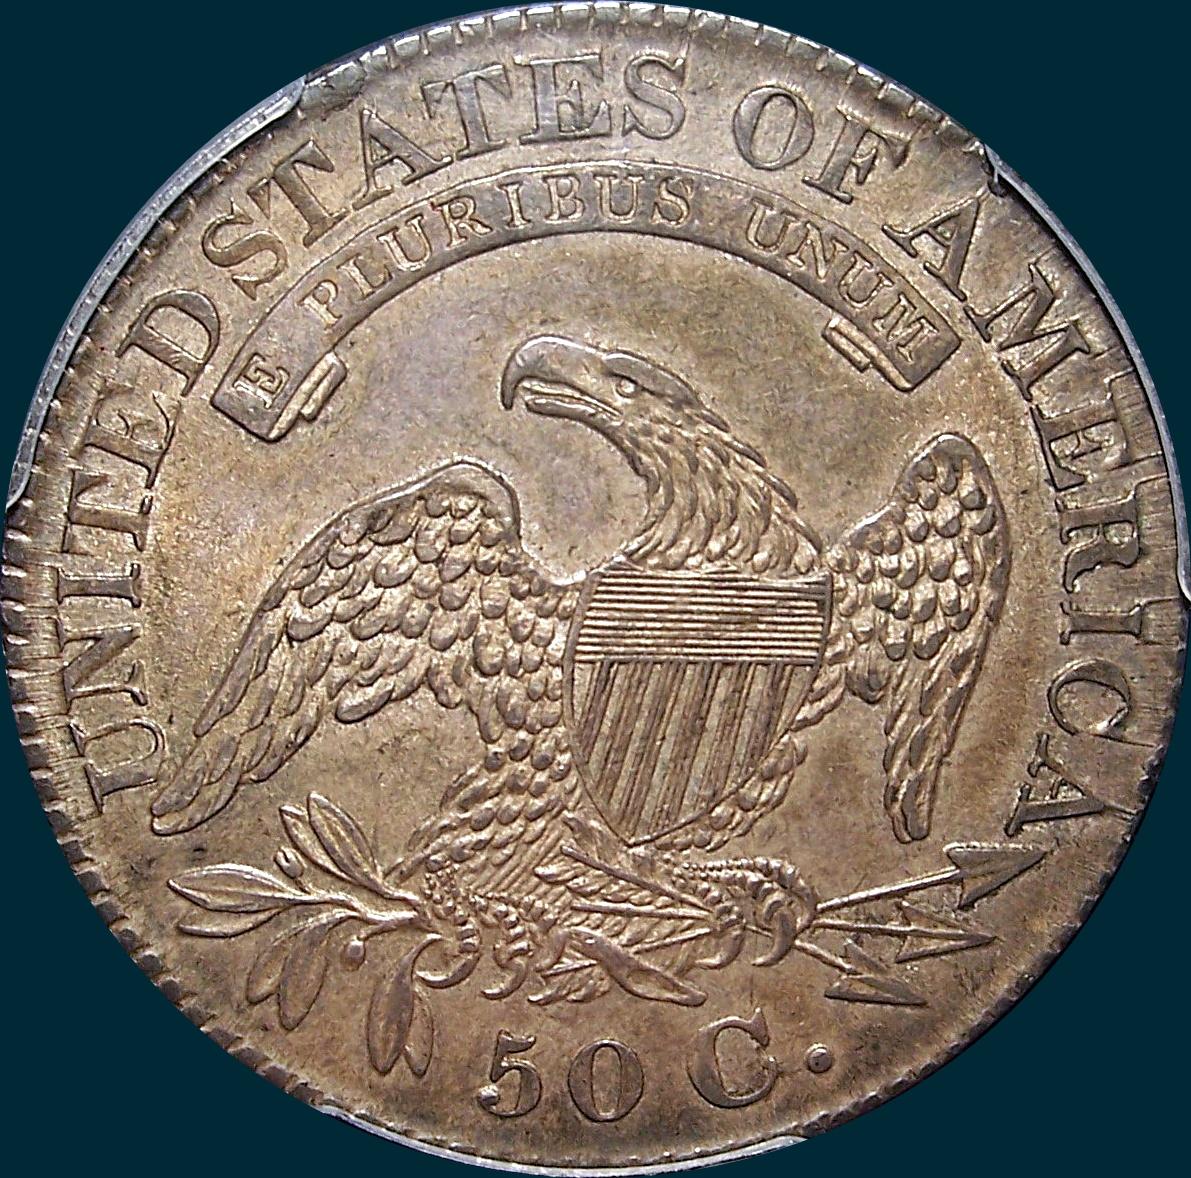 1828 O-107, curl base 2 with knob, capped bust half dollar